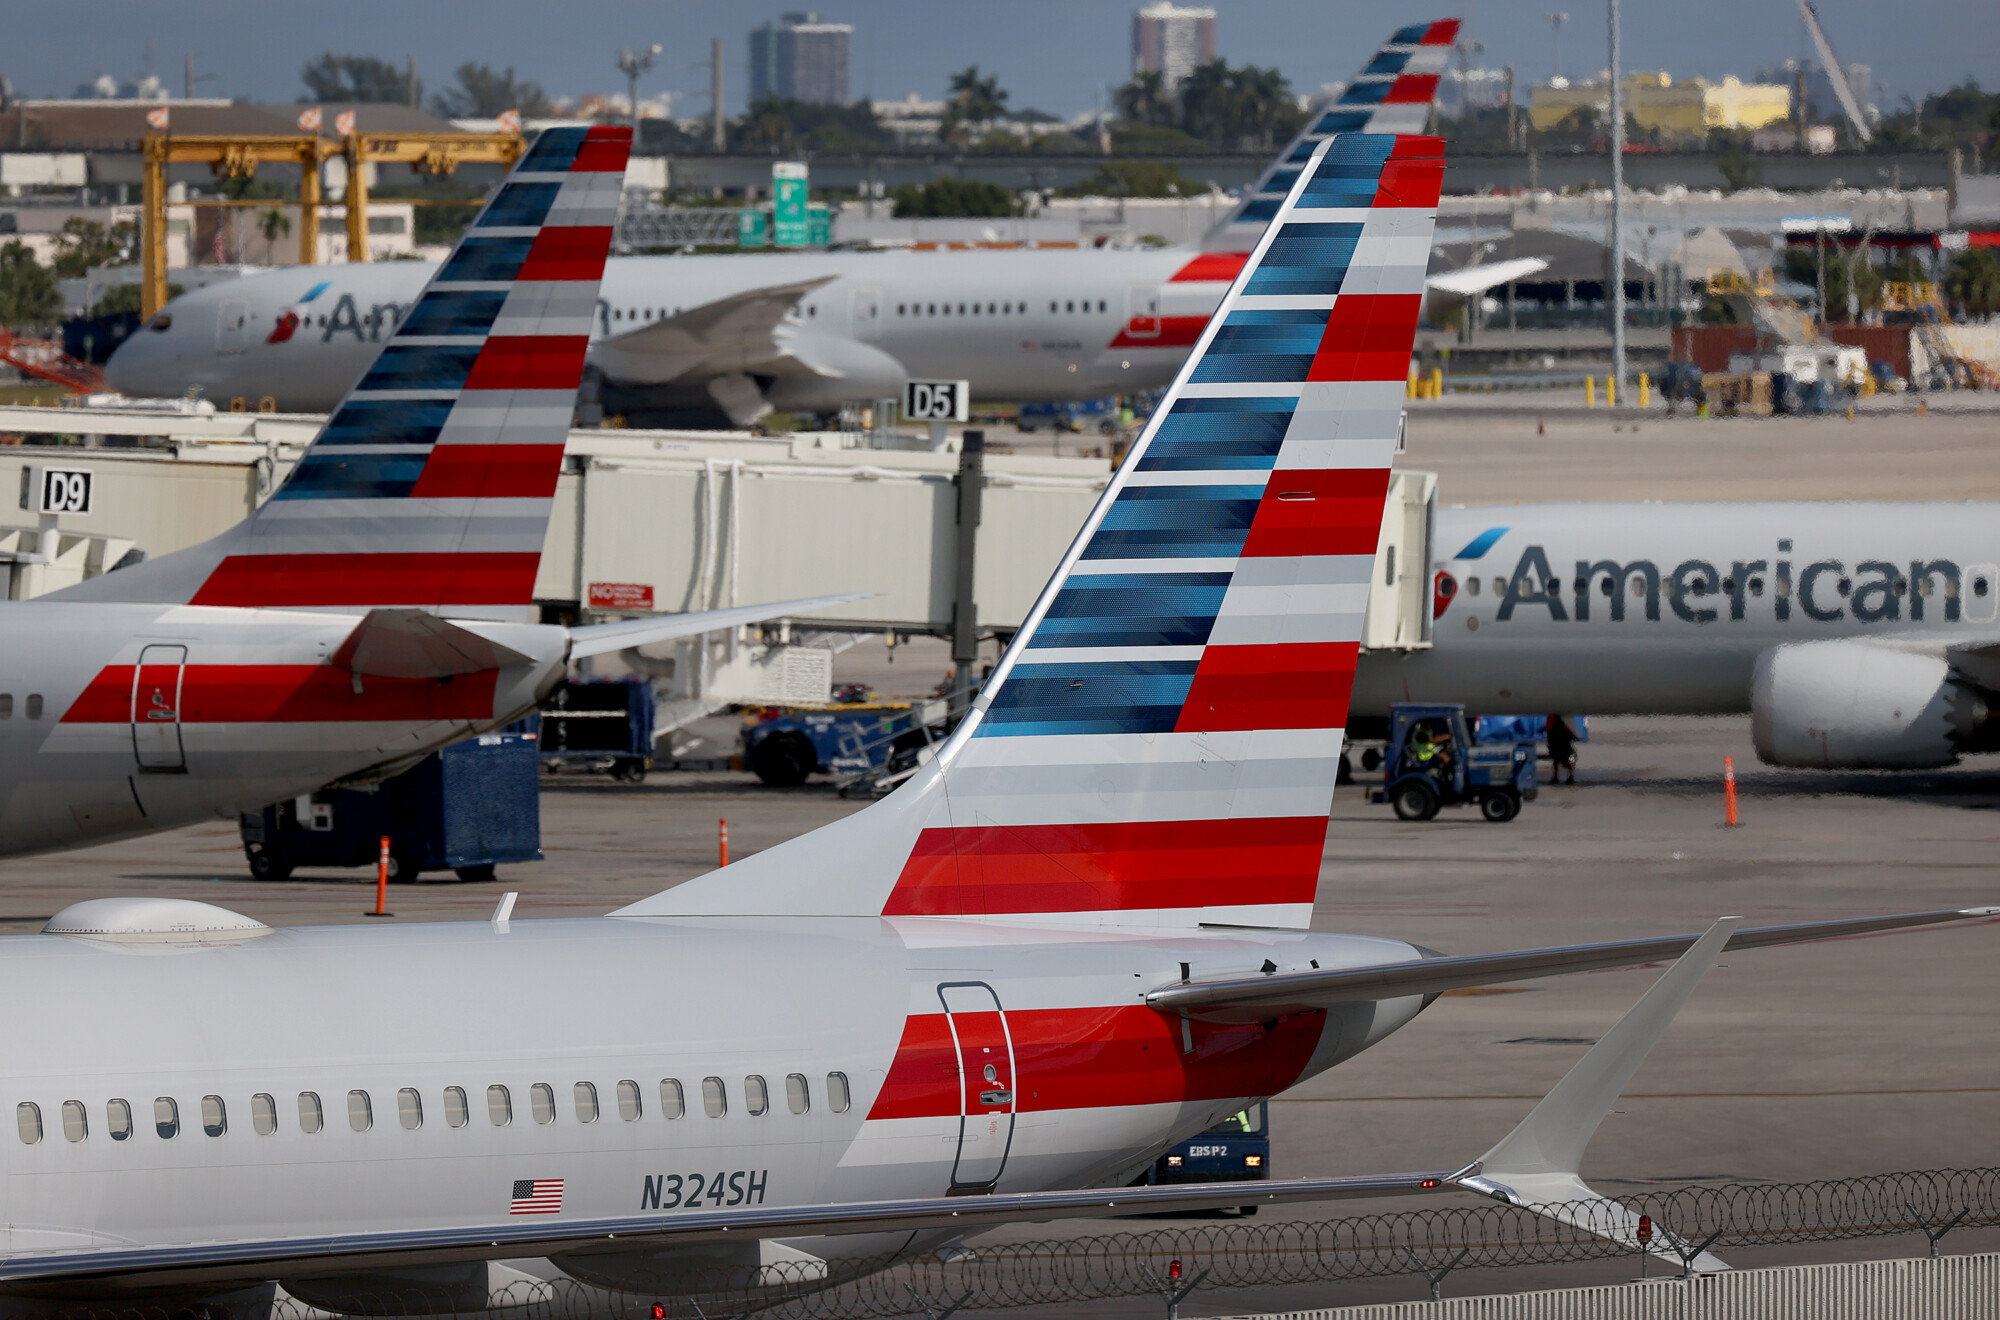 A Man Was Apprehended After Damaging a Plane During Boarding Process, American Airlines Says